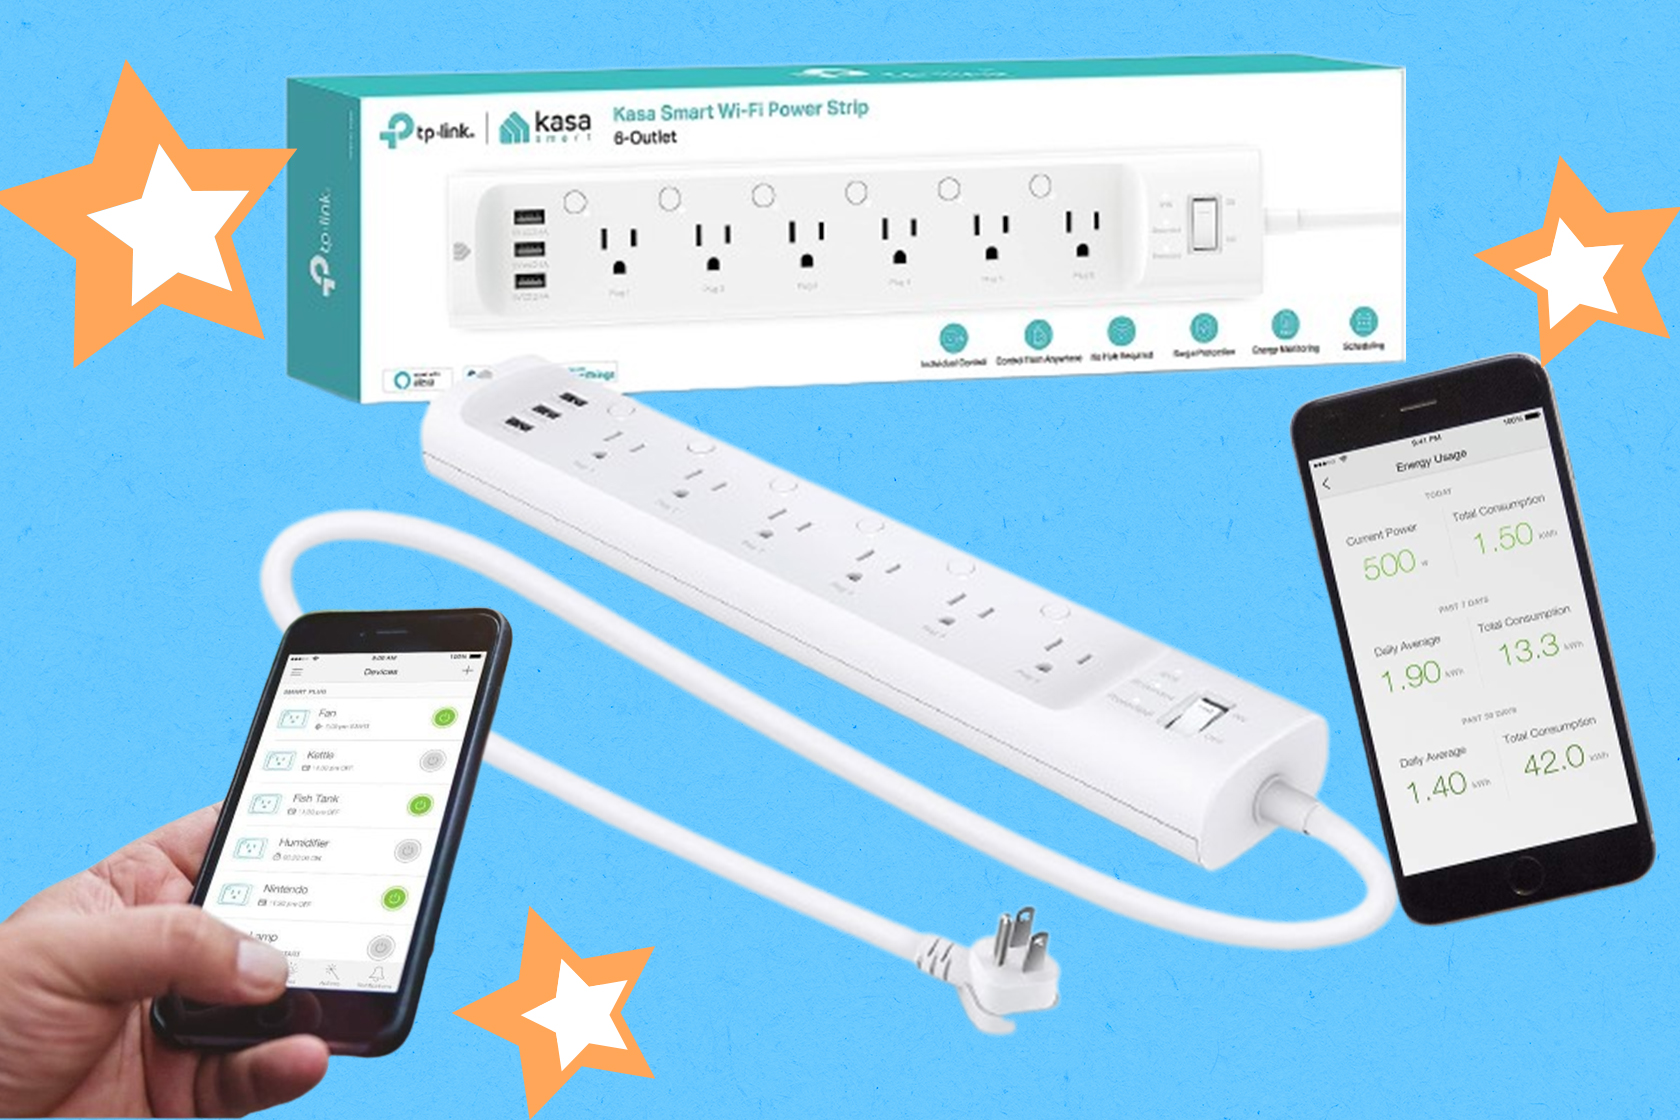 The  Kasa Smart Plug Power Strip is under $50 today